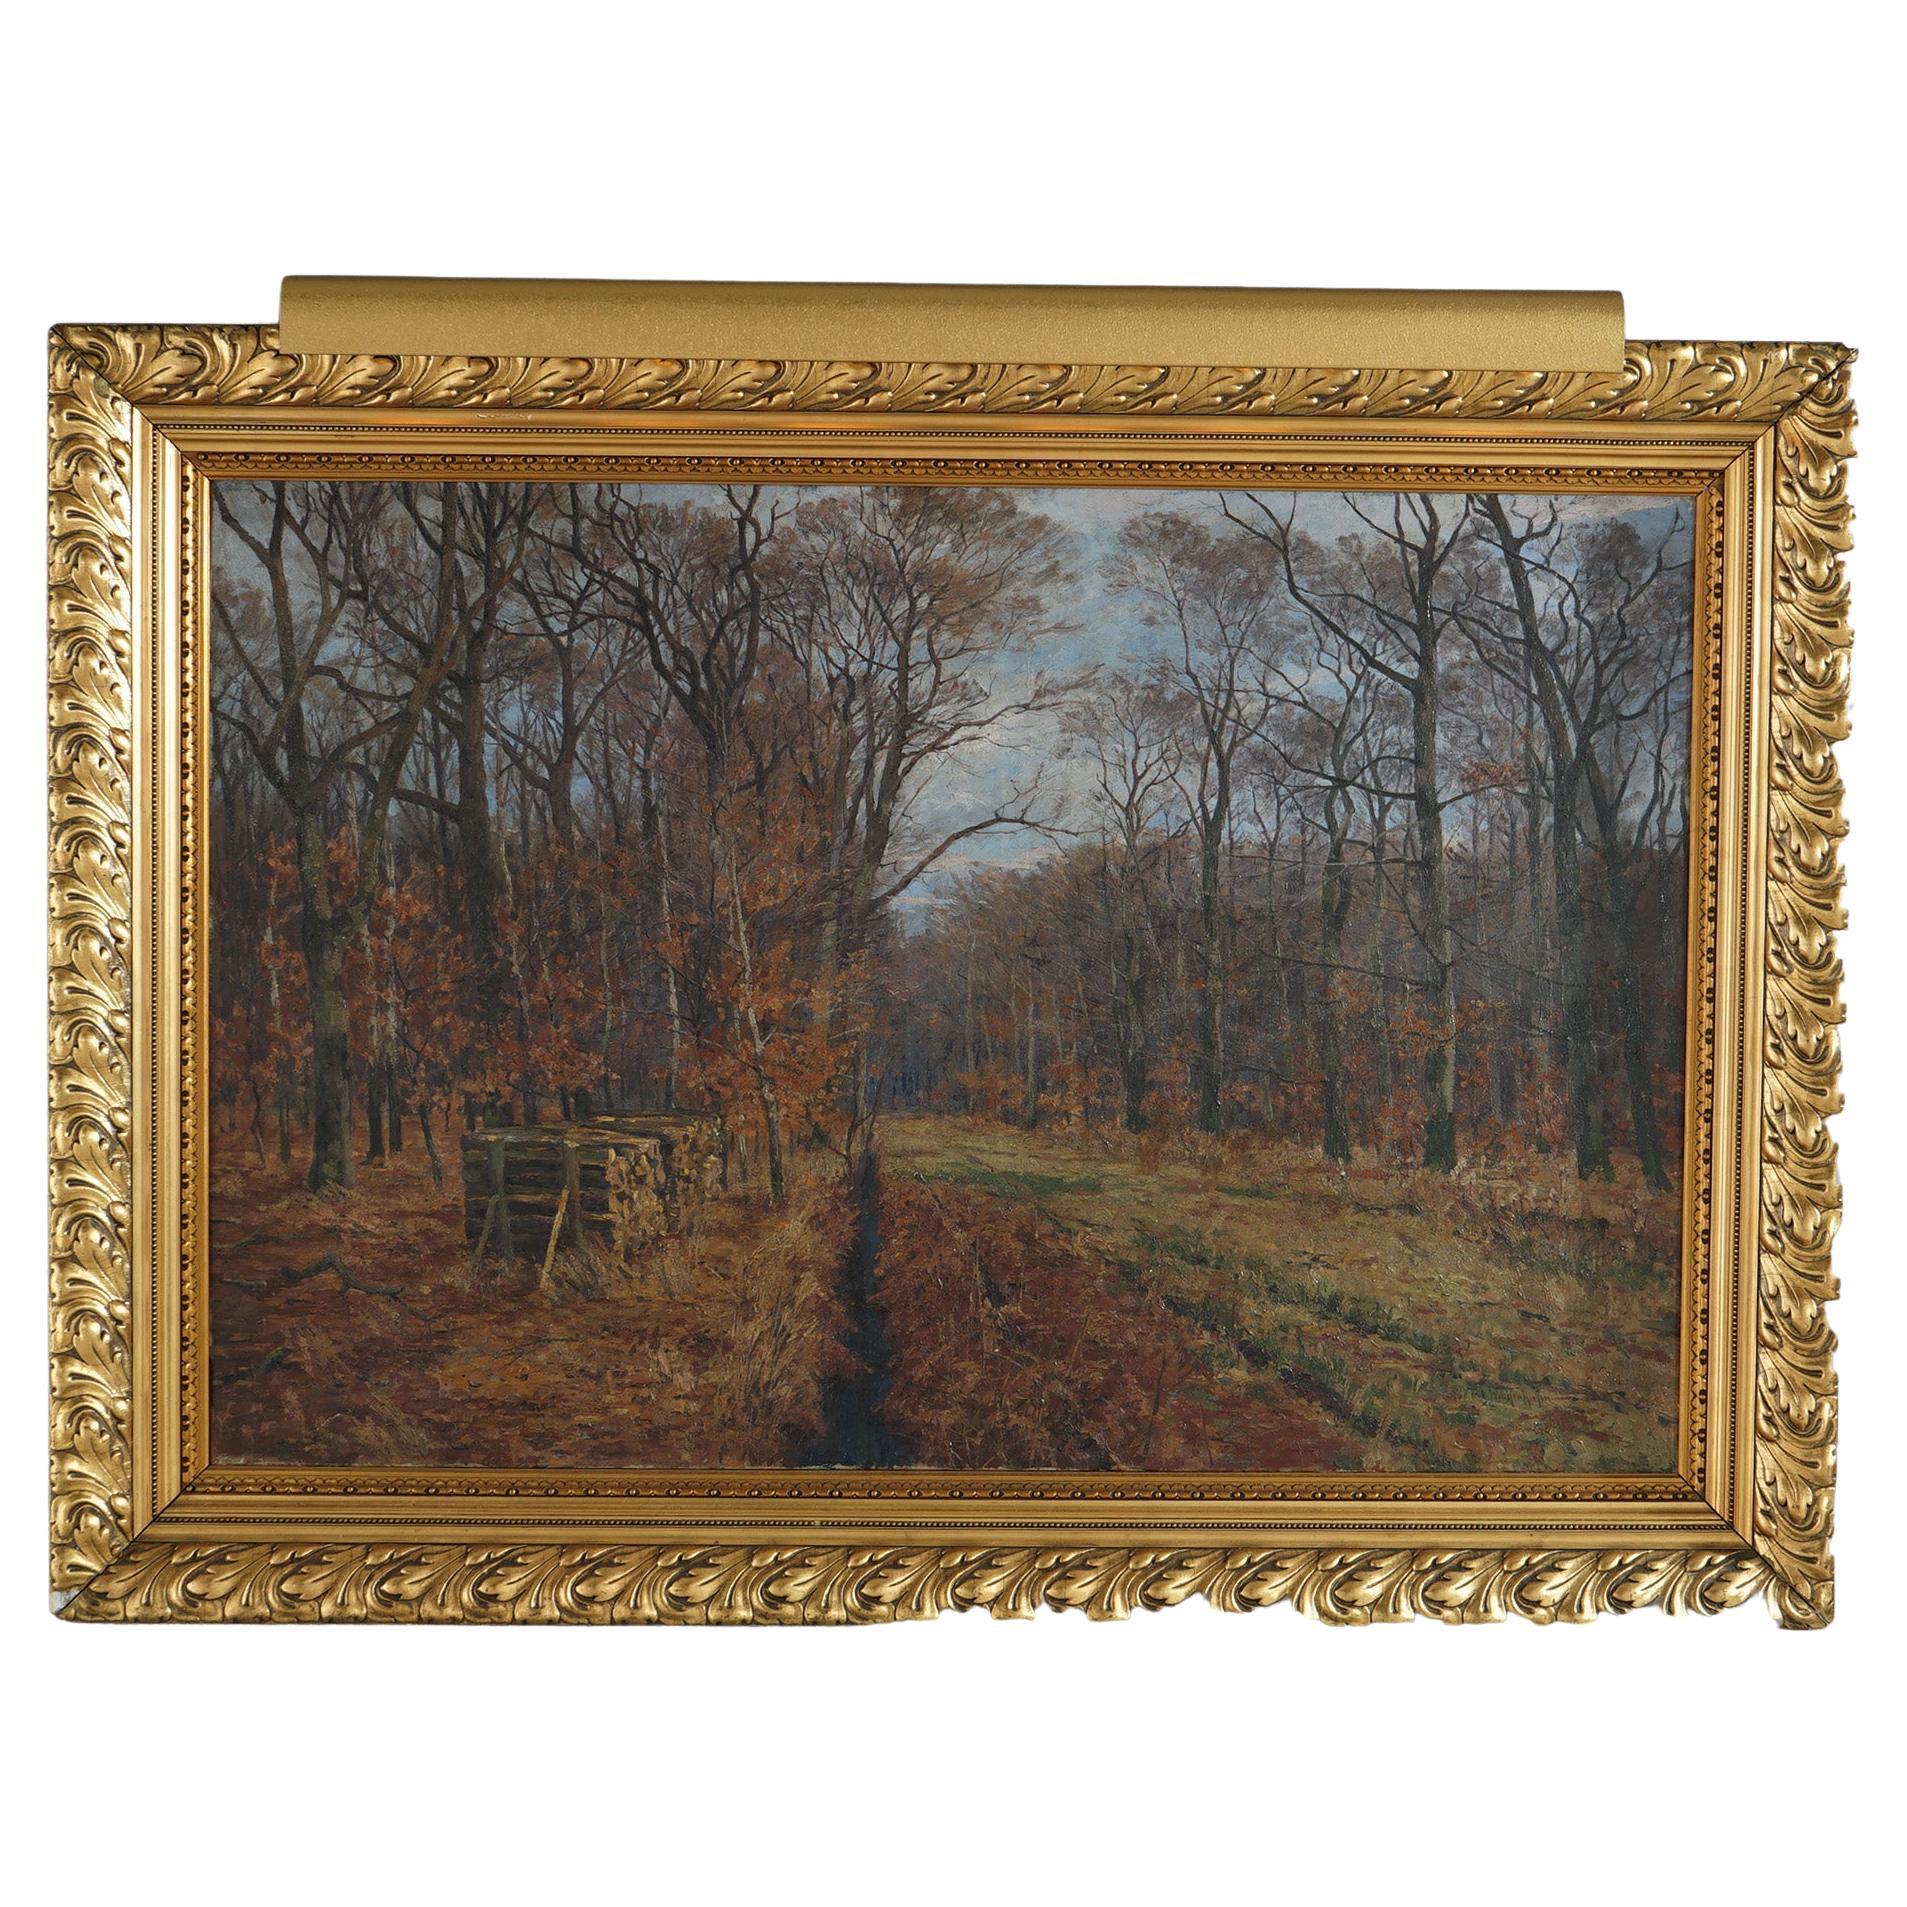 Oversized Antique Impressionistic Landscape Oil on Canvas Painting, Signed C1920 For Sale